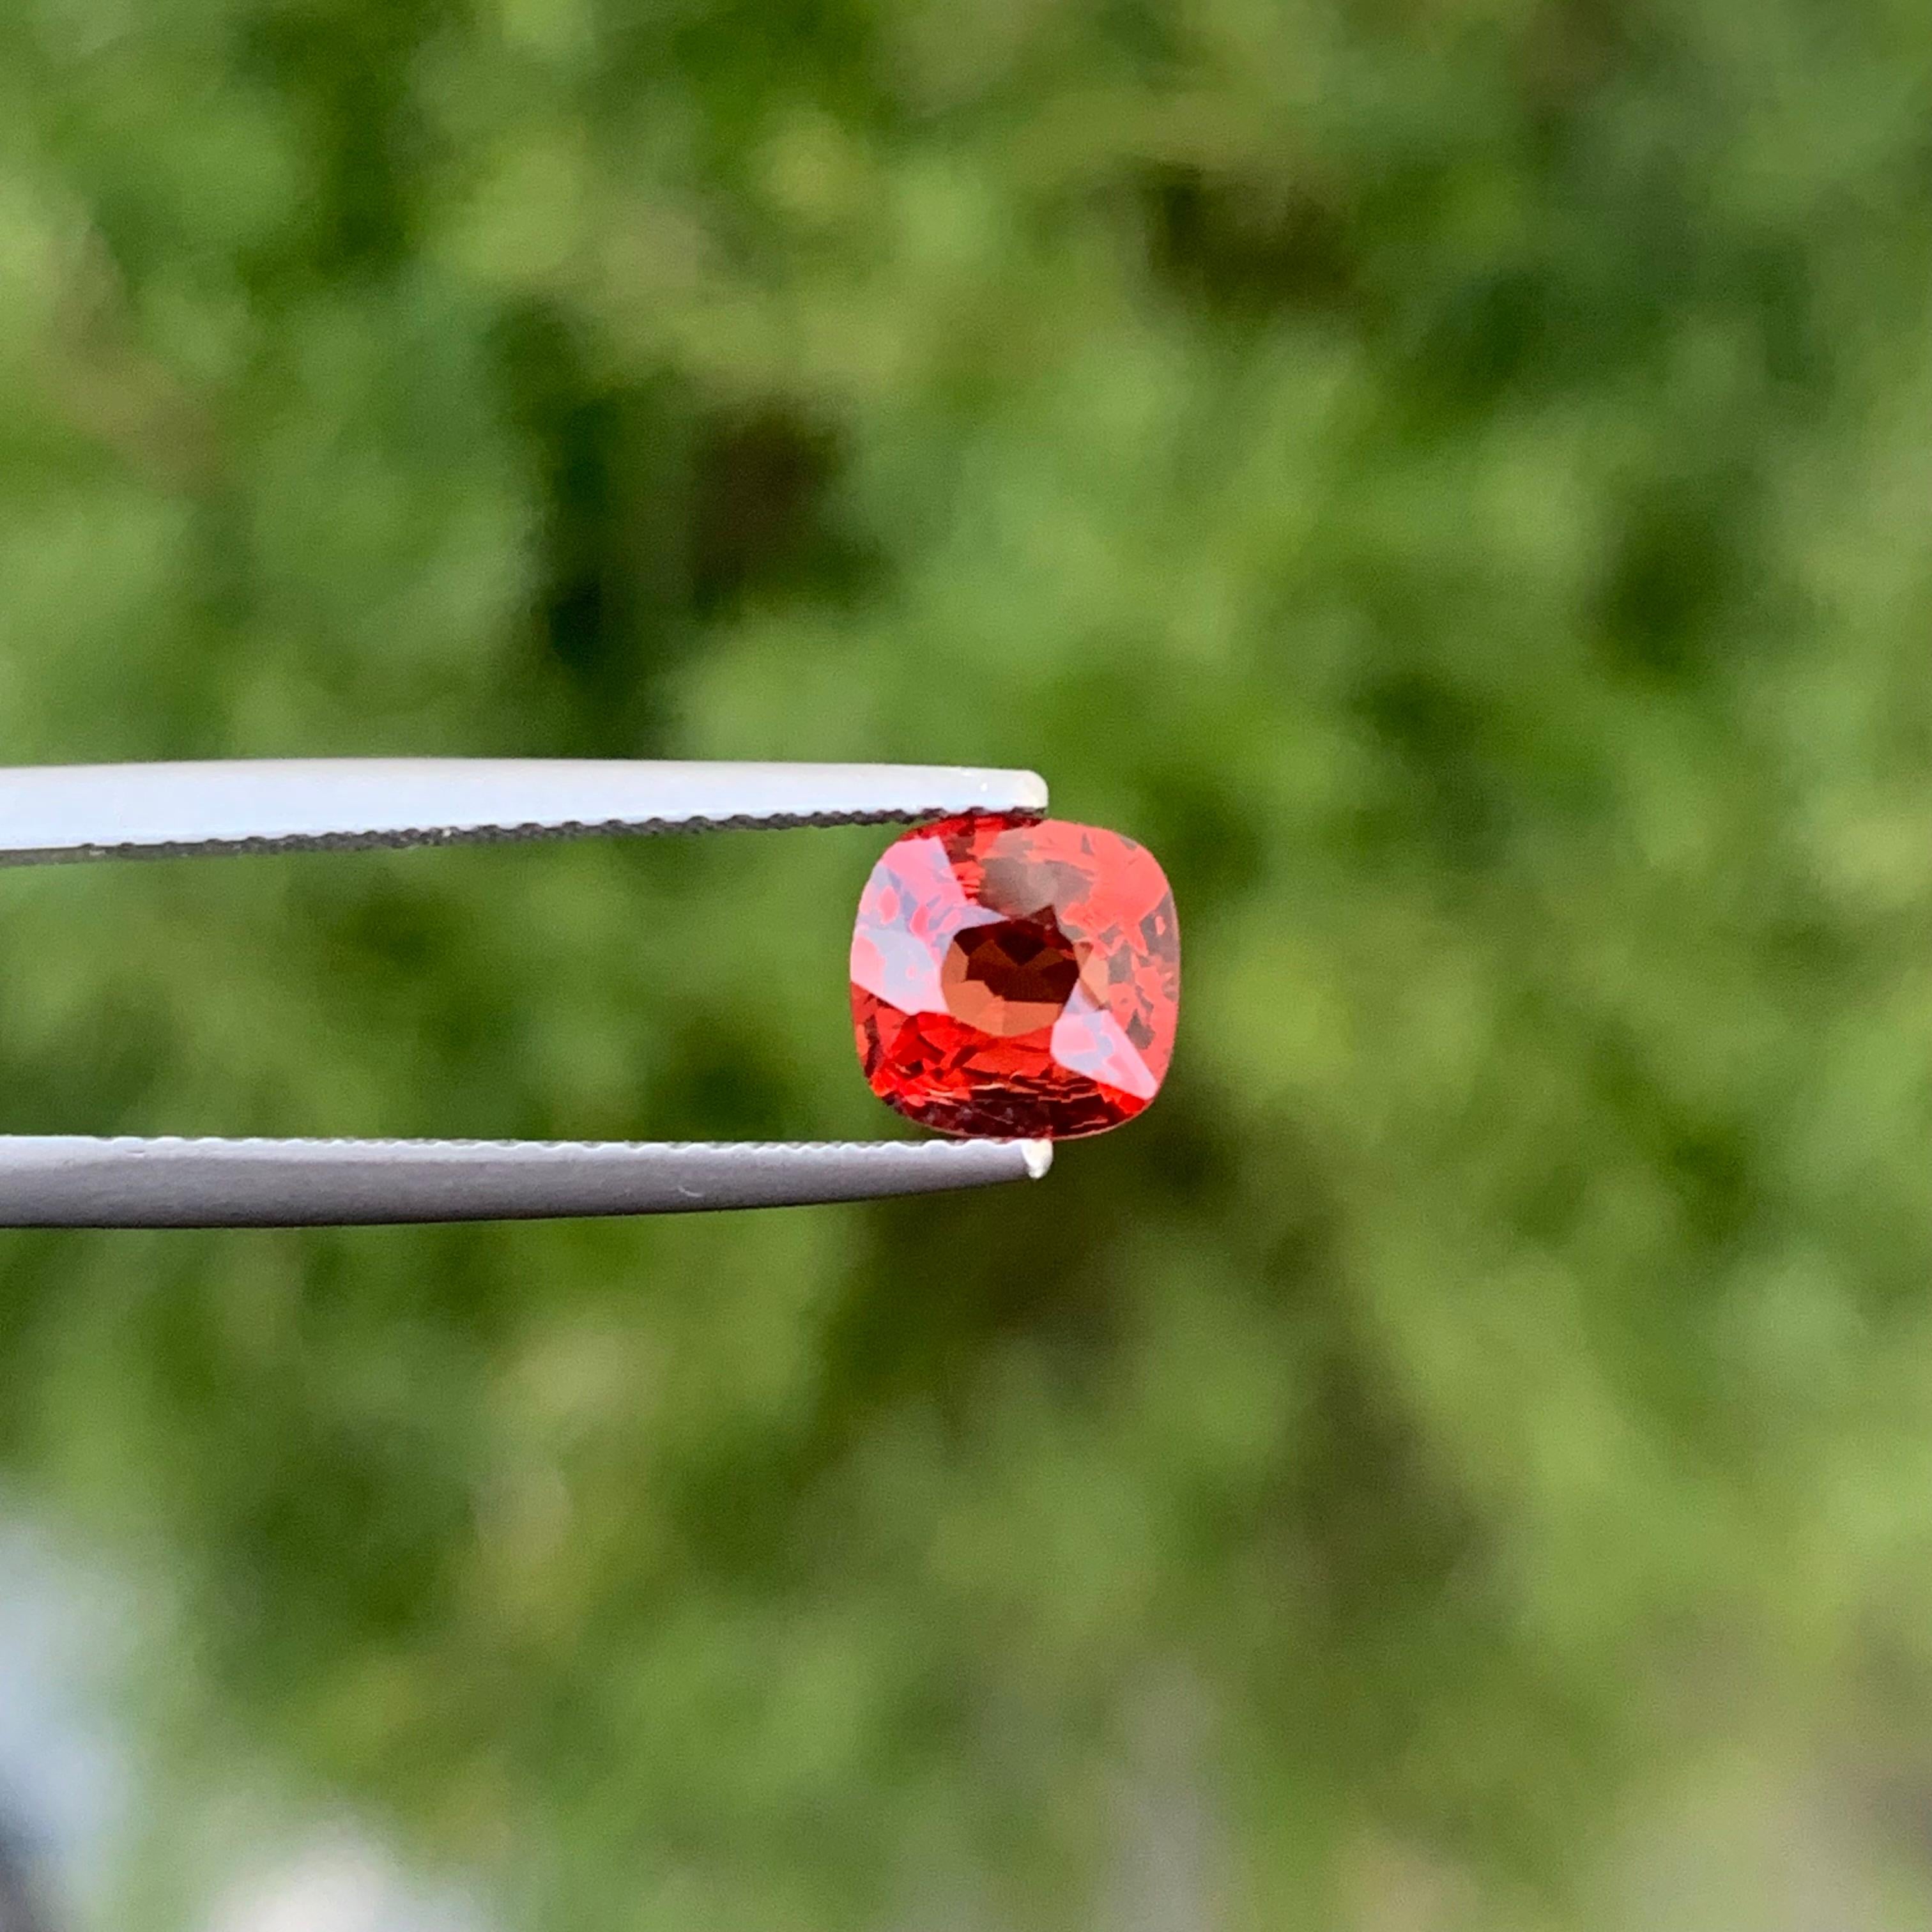 Charming 1.25 Carat Cushion Cut Loose Natural Red Spinel from Burma Myanmar For Sale 4